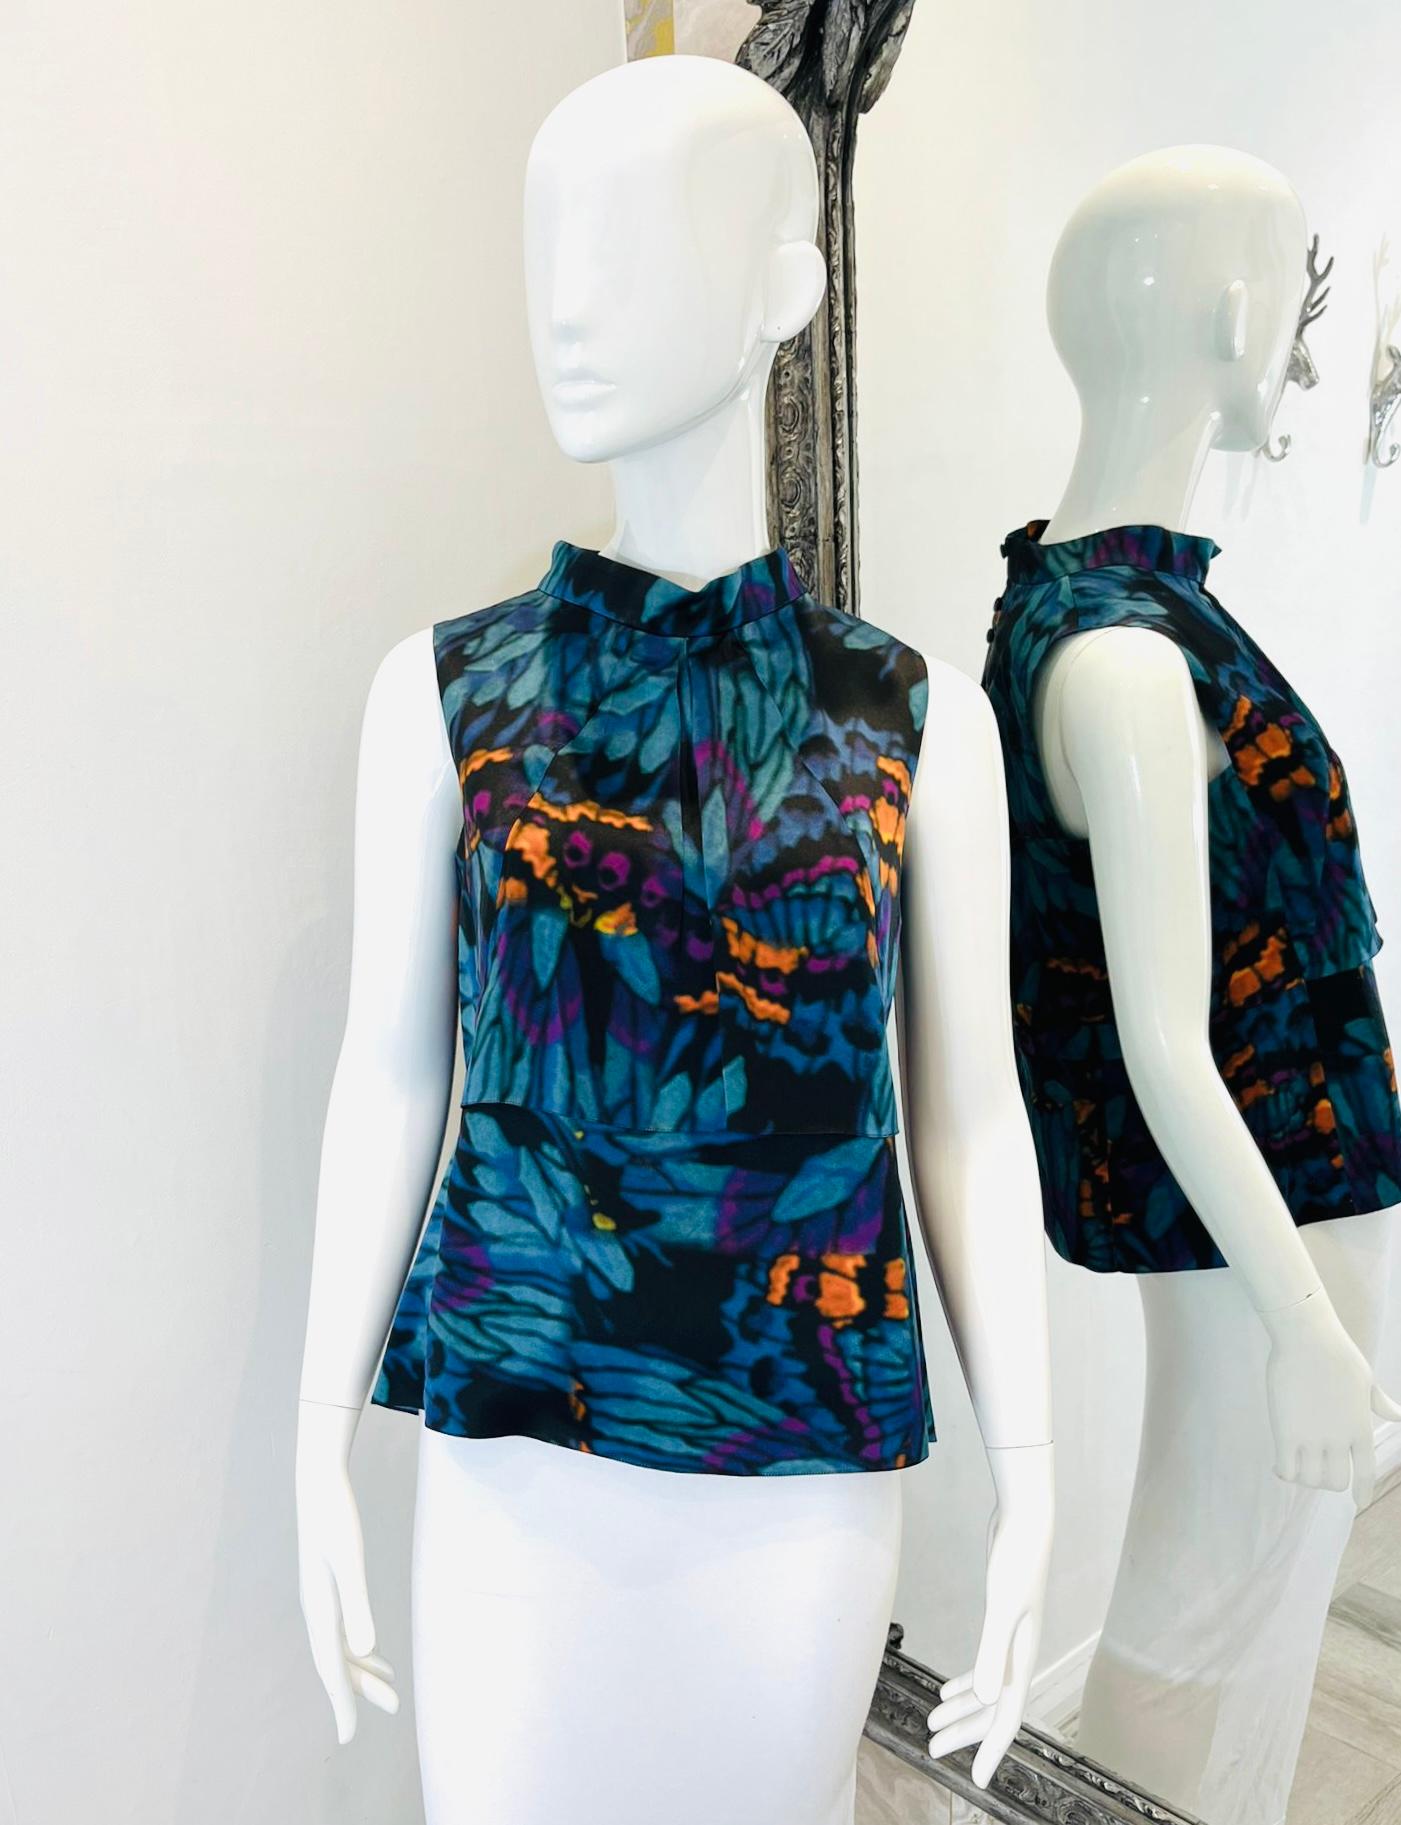 Erdem Silk Top

Blue, sleeveless top designed with butterfly-inspired abstract prints.

Featuring high neckline with button loop closure and cut-out detail to rear.

Size – 12UK

Condition – Very Good

Composition – 100% Silk